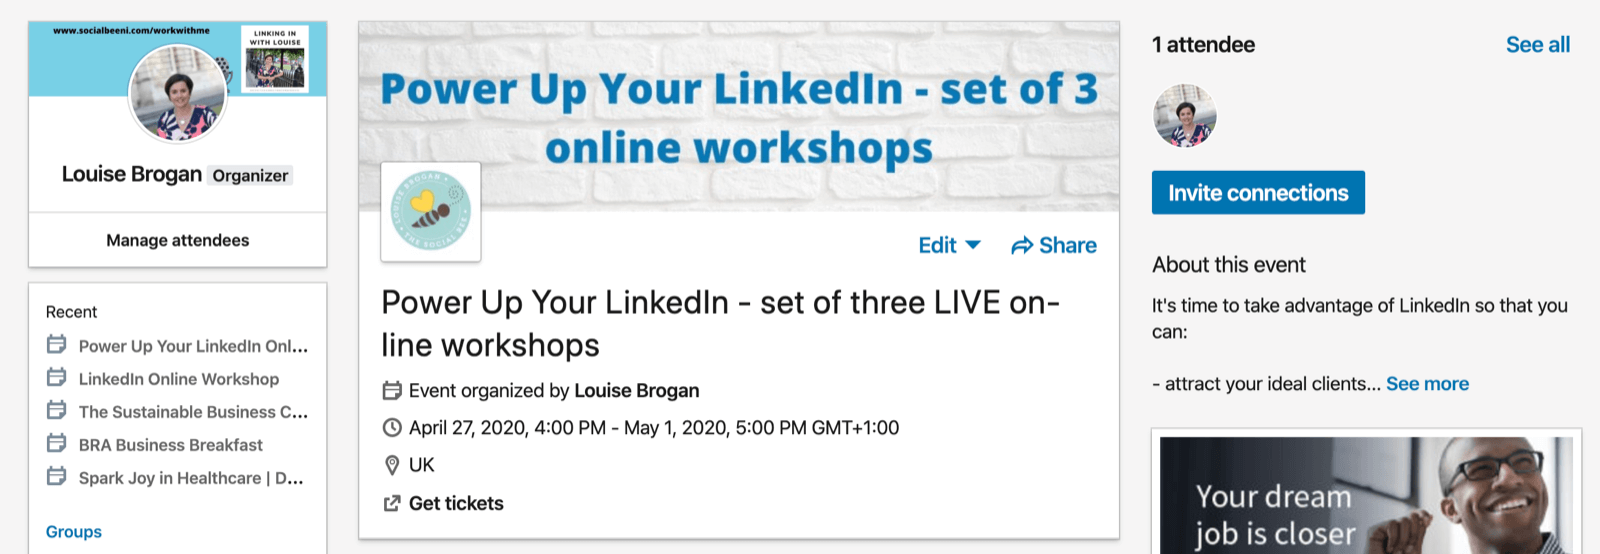 example of LinkedIn event page after clicking Create button